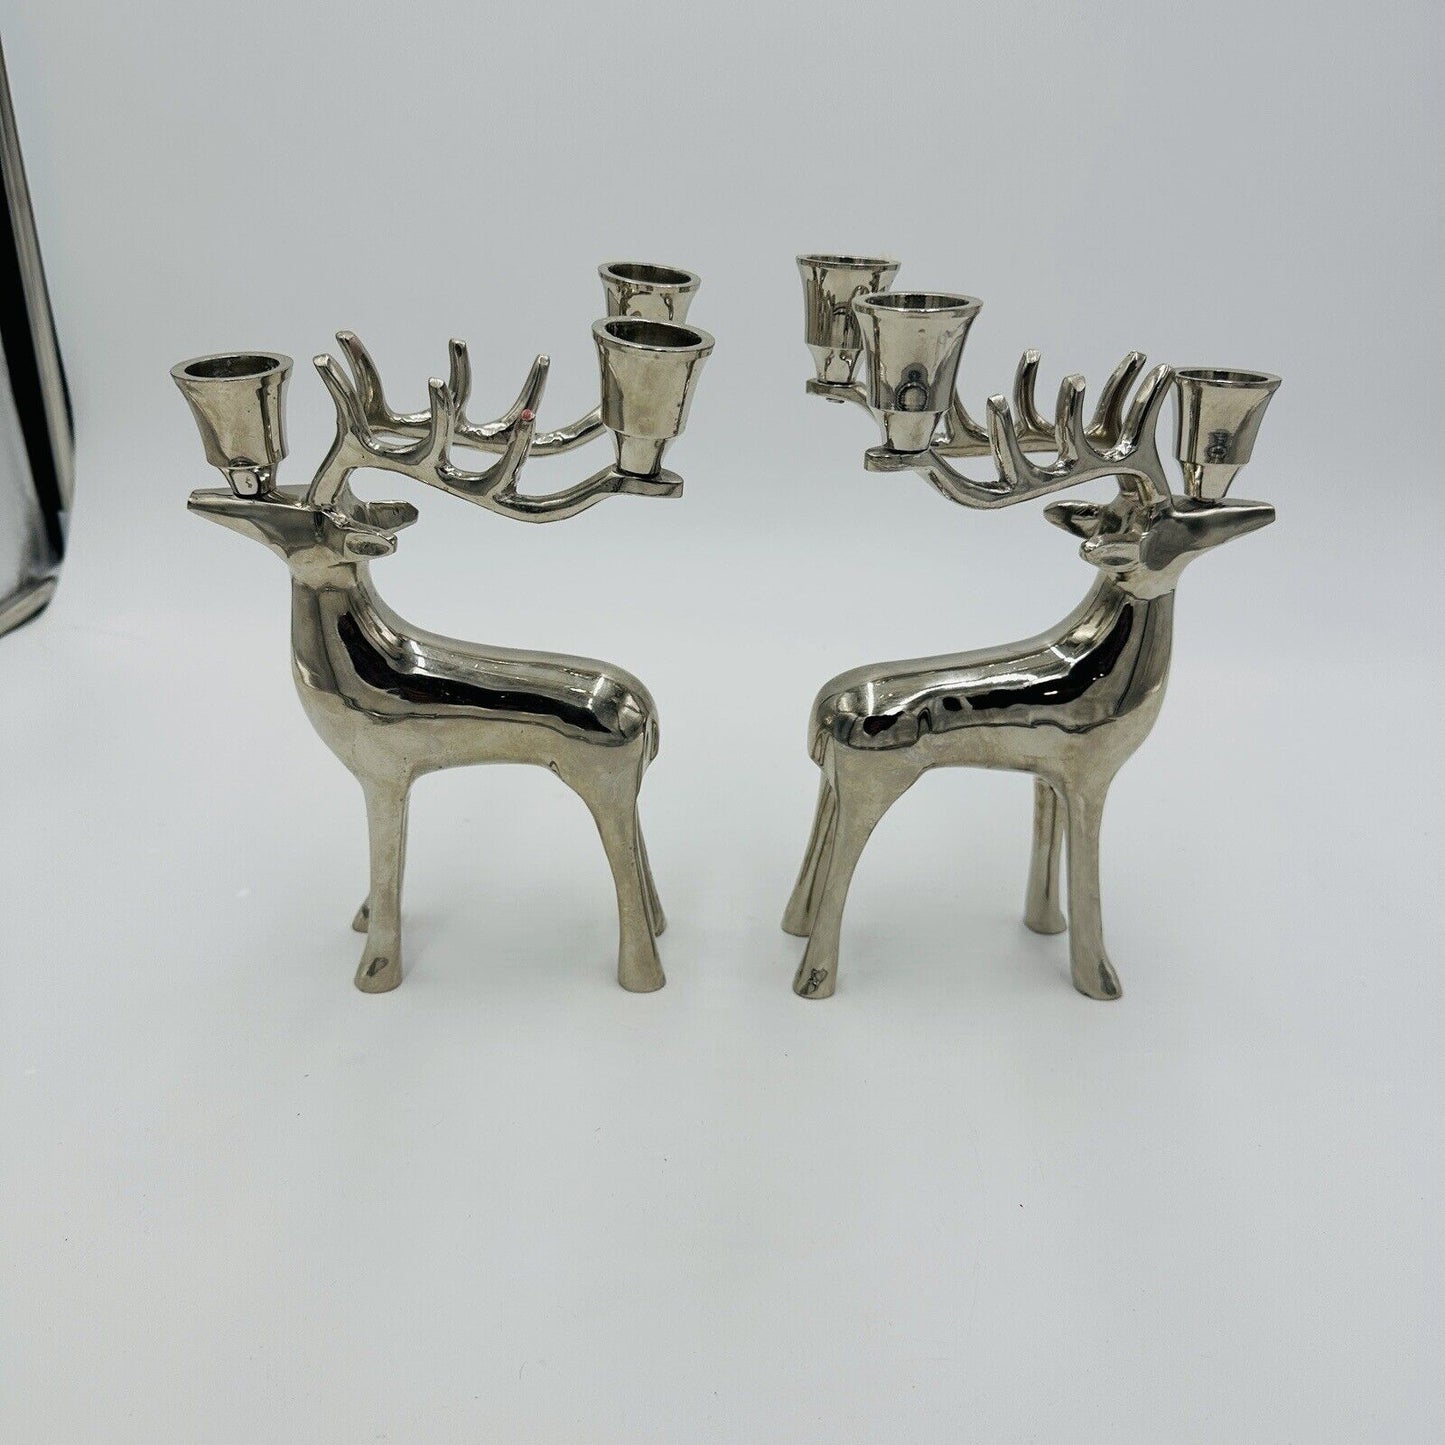 Pottery Barn Reindeer Candelabra Silver Tone Pair Of Candle Holder Solid Vintage